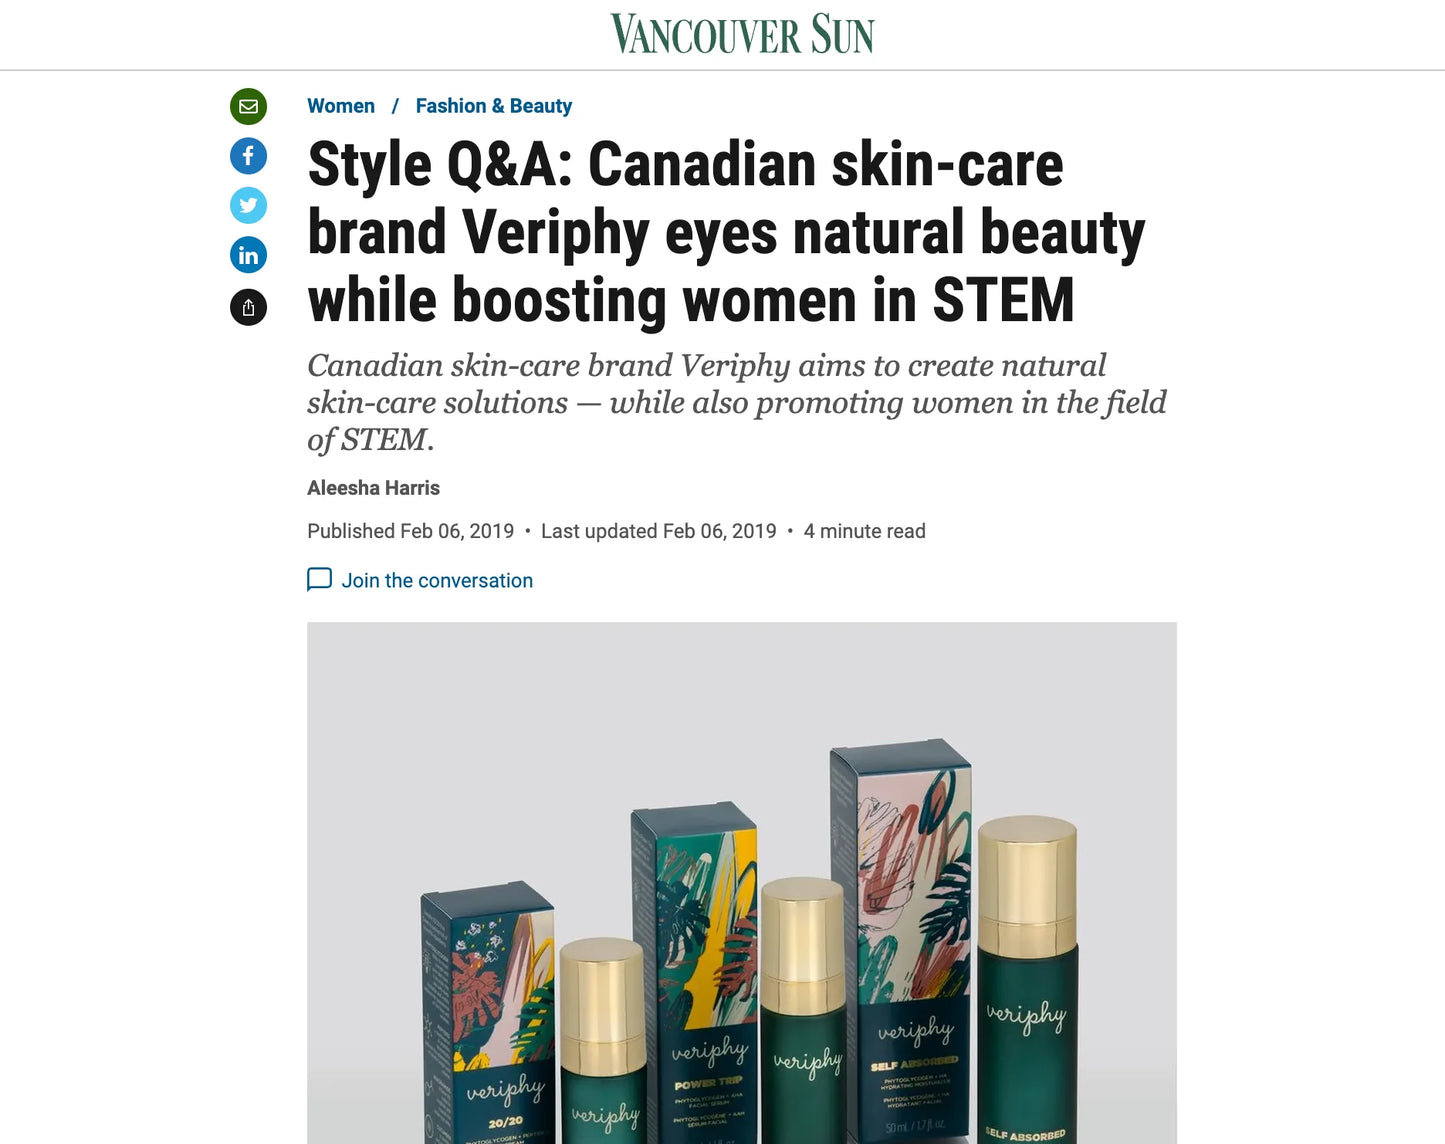 Veriphy Skincare featured in Vancouver Sun 